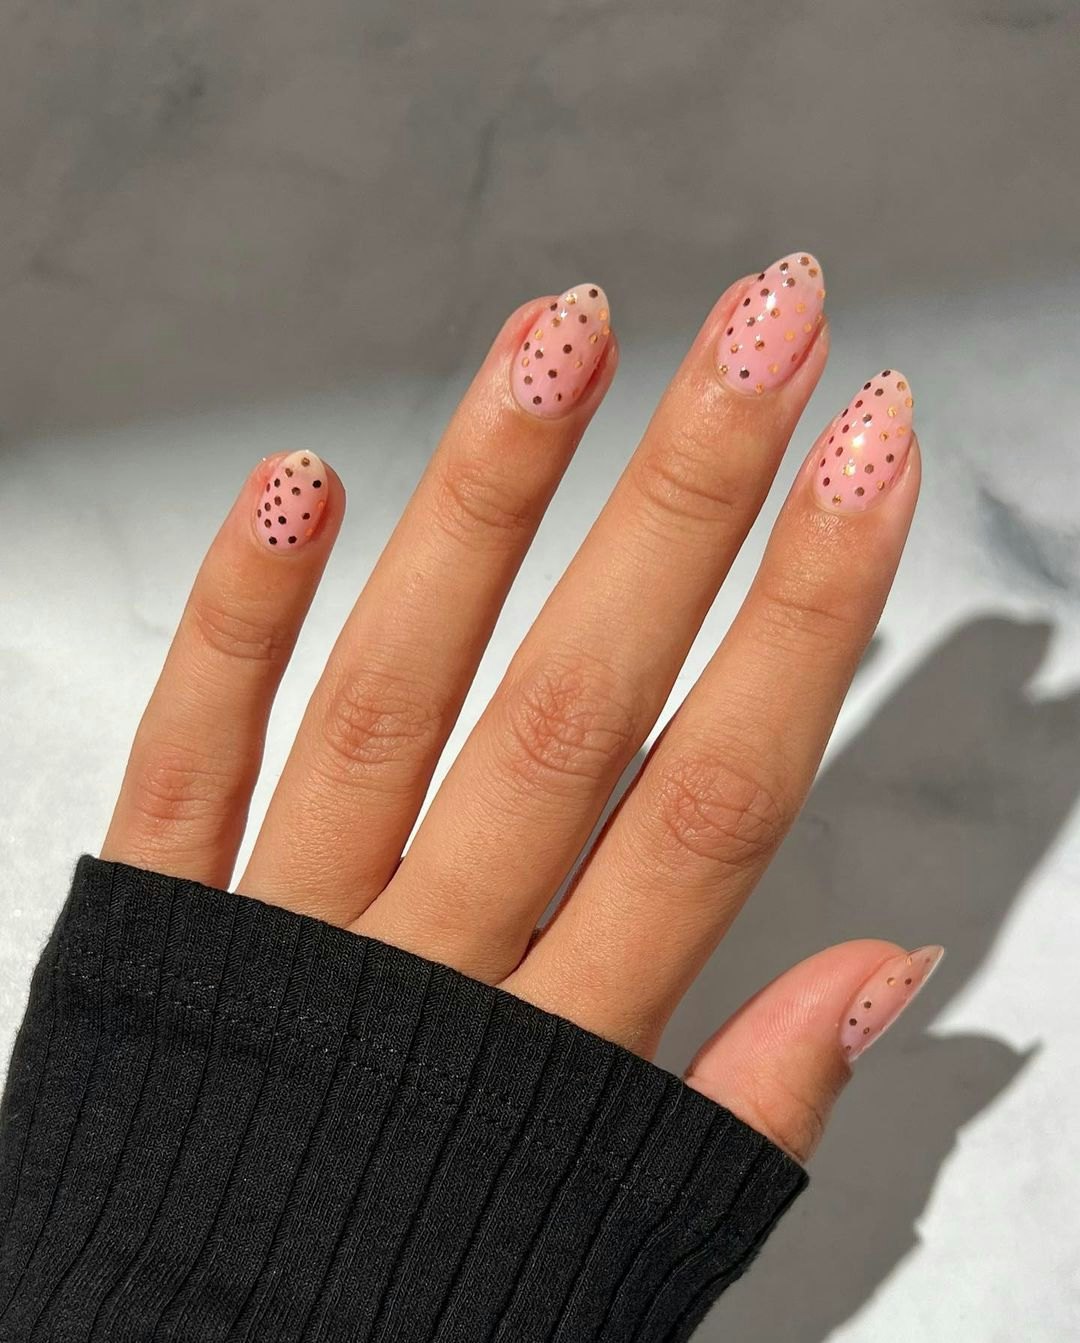 Easy Nail Art Designs For Beginners With Short Nails Without Tools | Easy  Nail Art Designs For Beginners With Short Nails Without Tools #nail #nails # nail art #nails art #design nails #nails